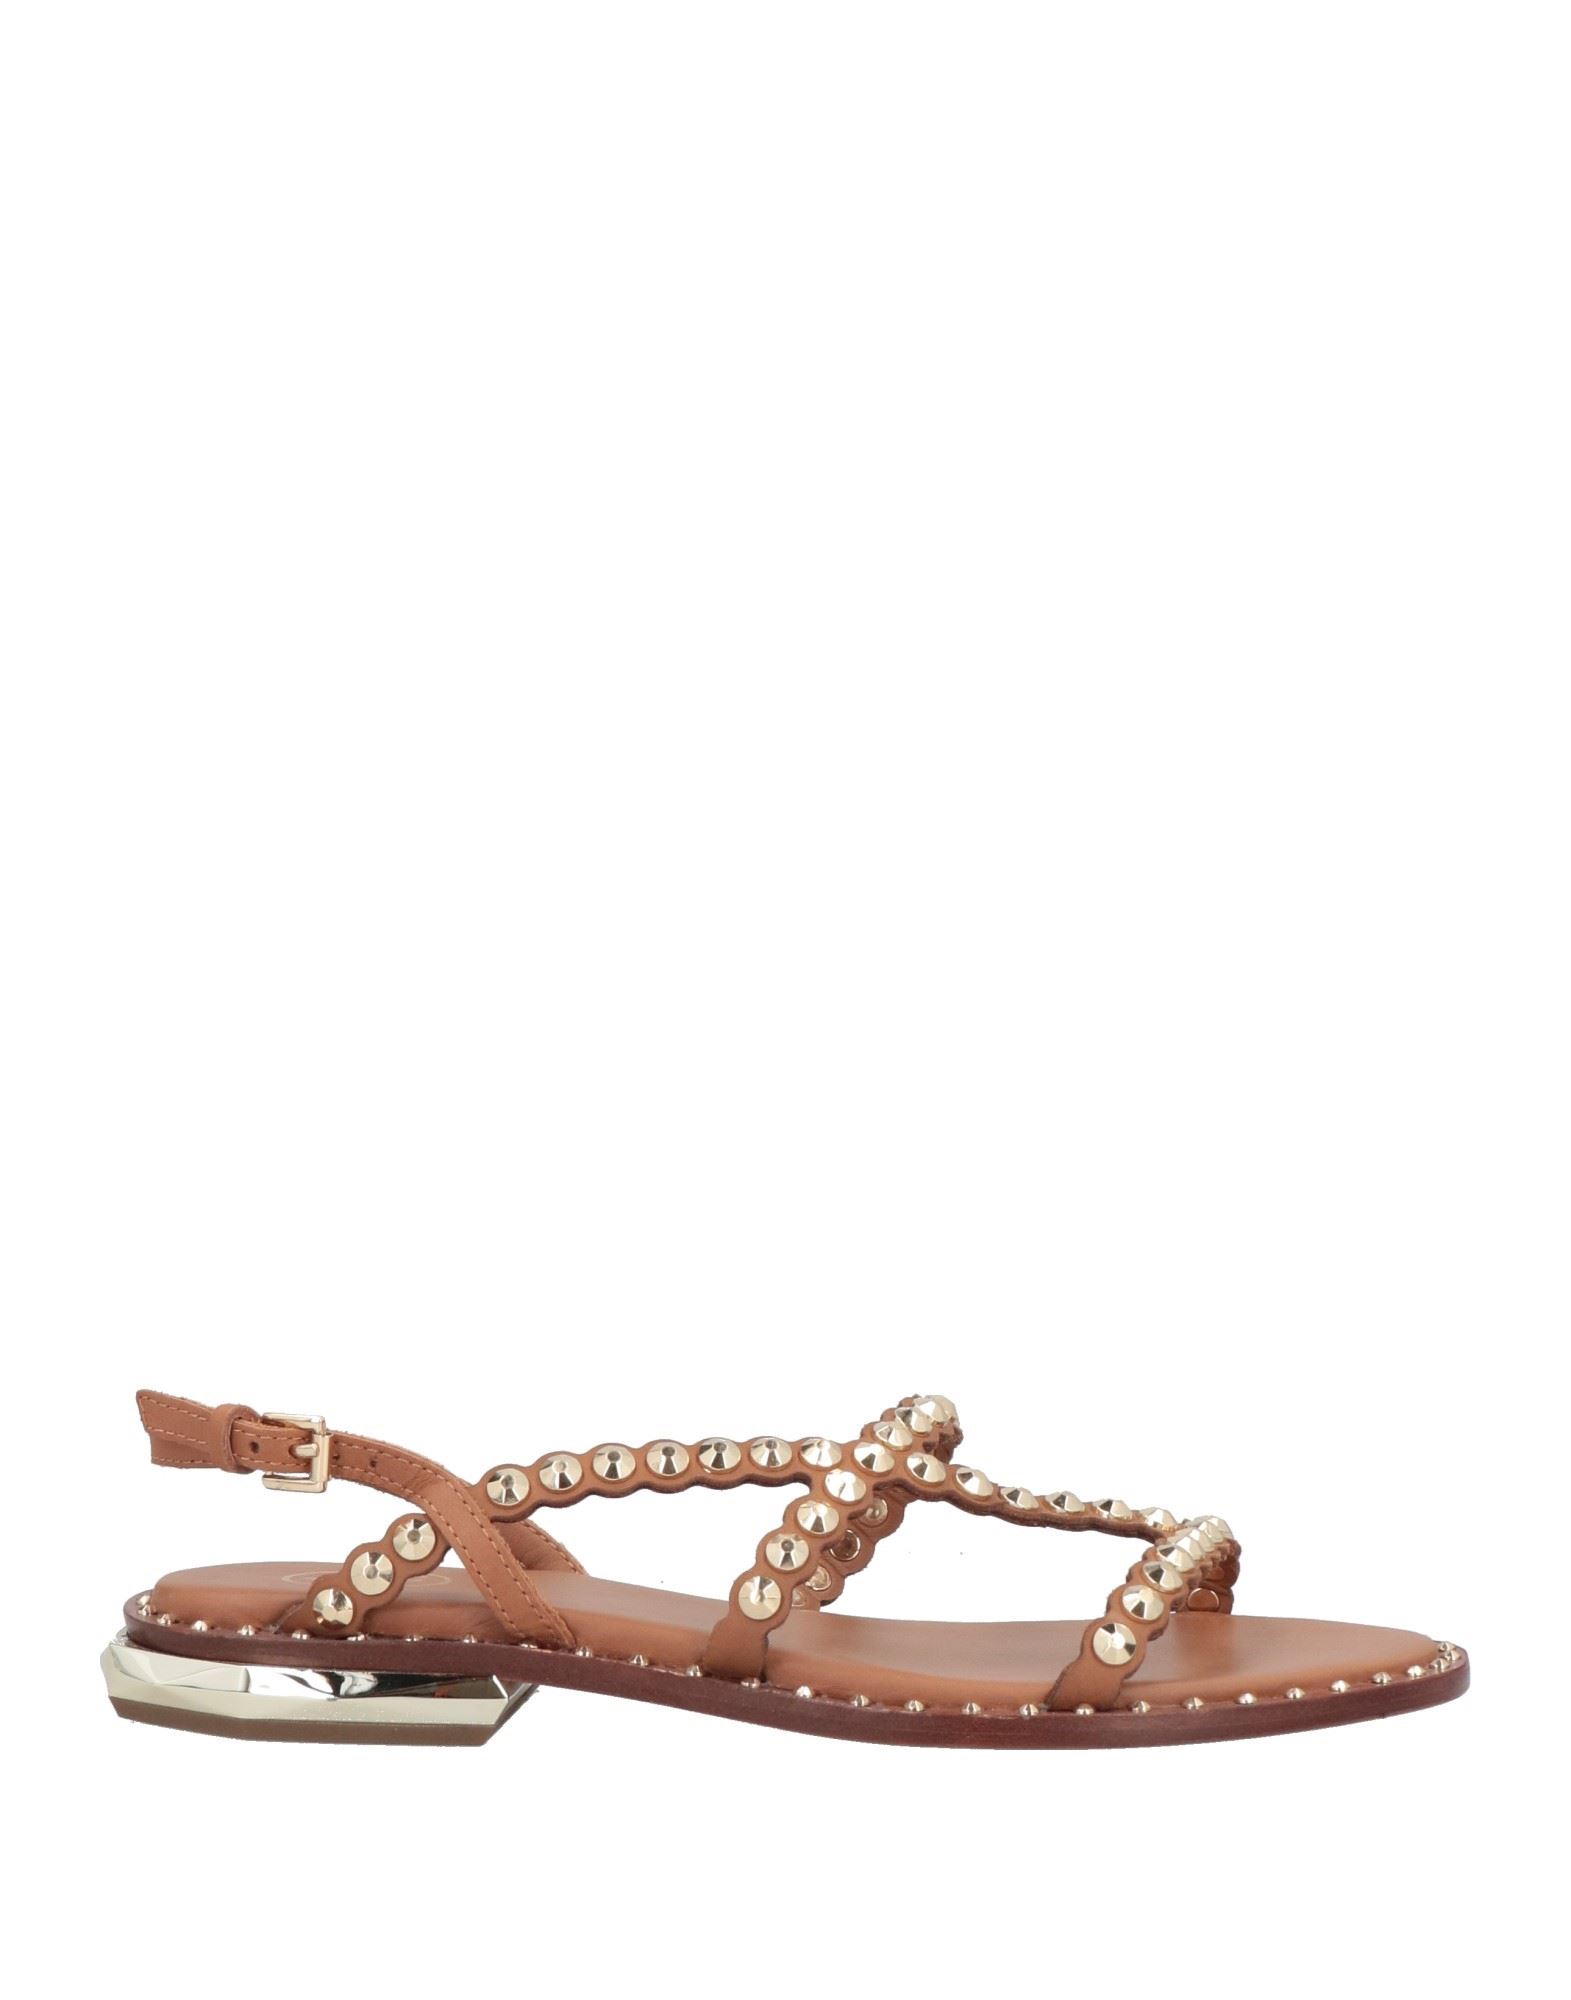 Ash Sandals In Brown